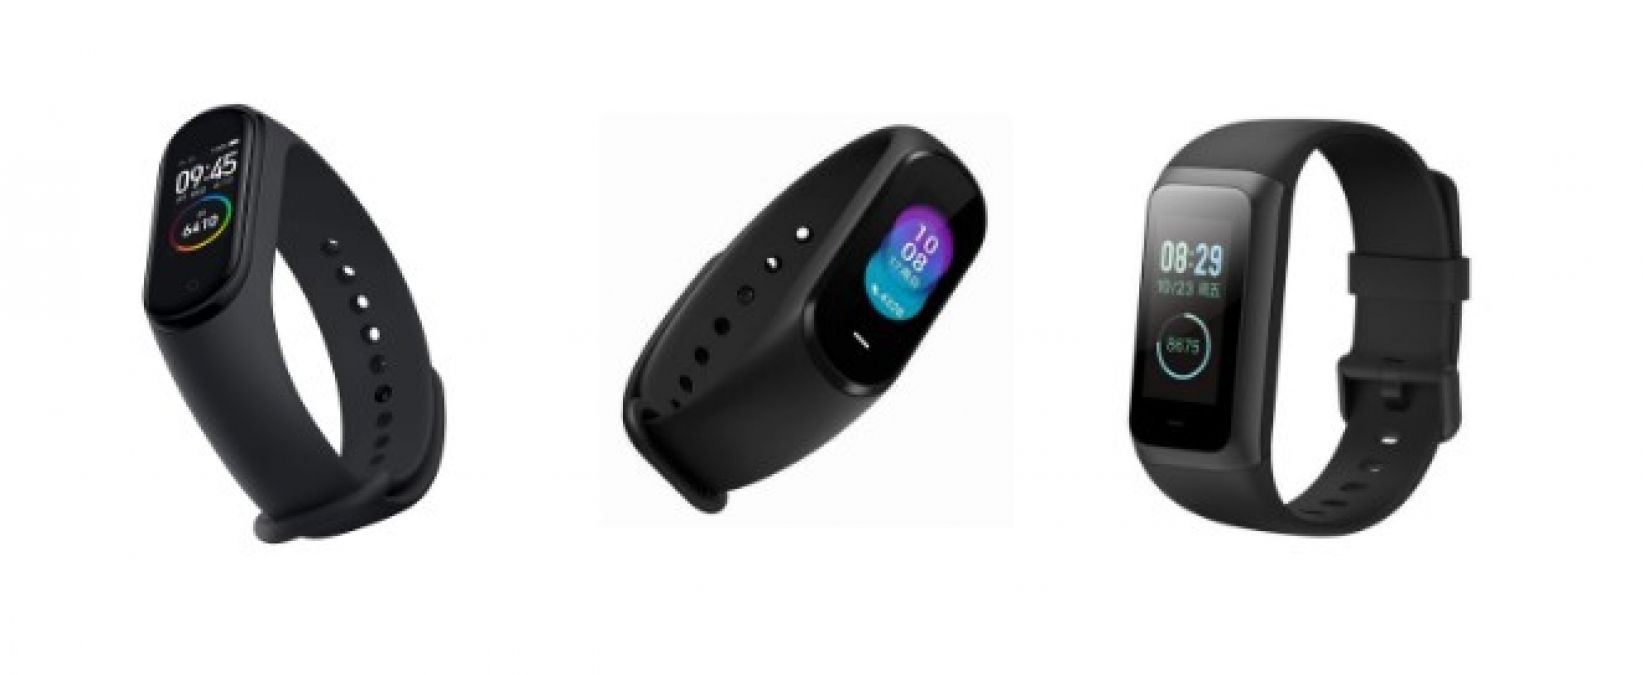 Fitness Bracelet: How Much Is Amazfit Cor 2 Different From Xiaomi Mi Band 4, Learn More Here